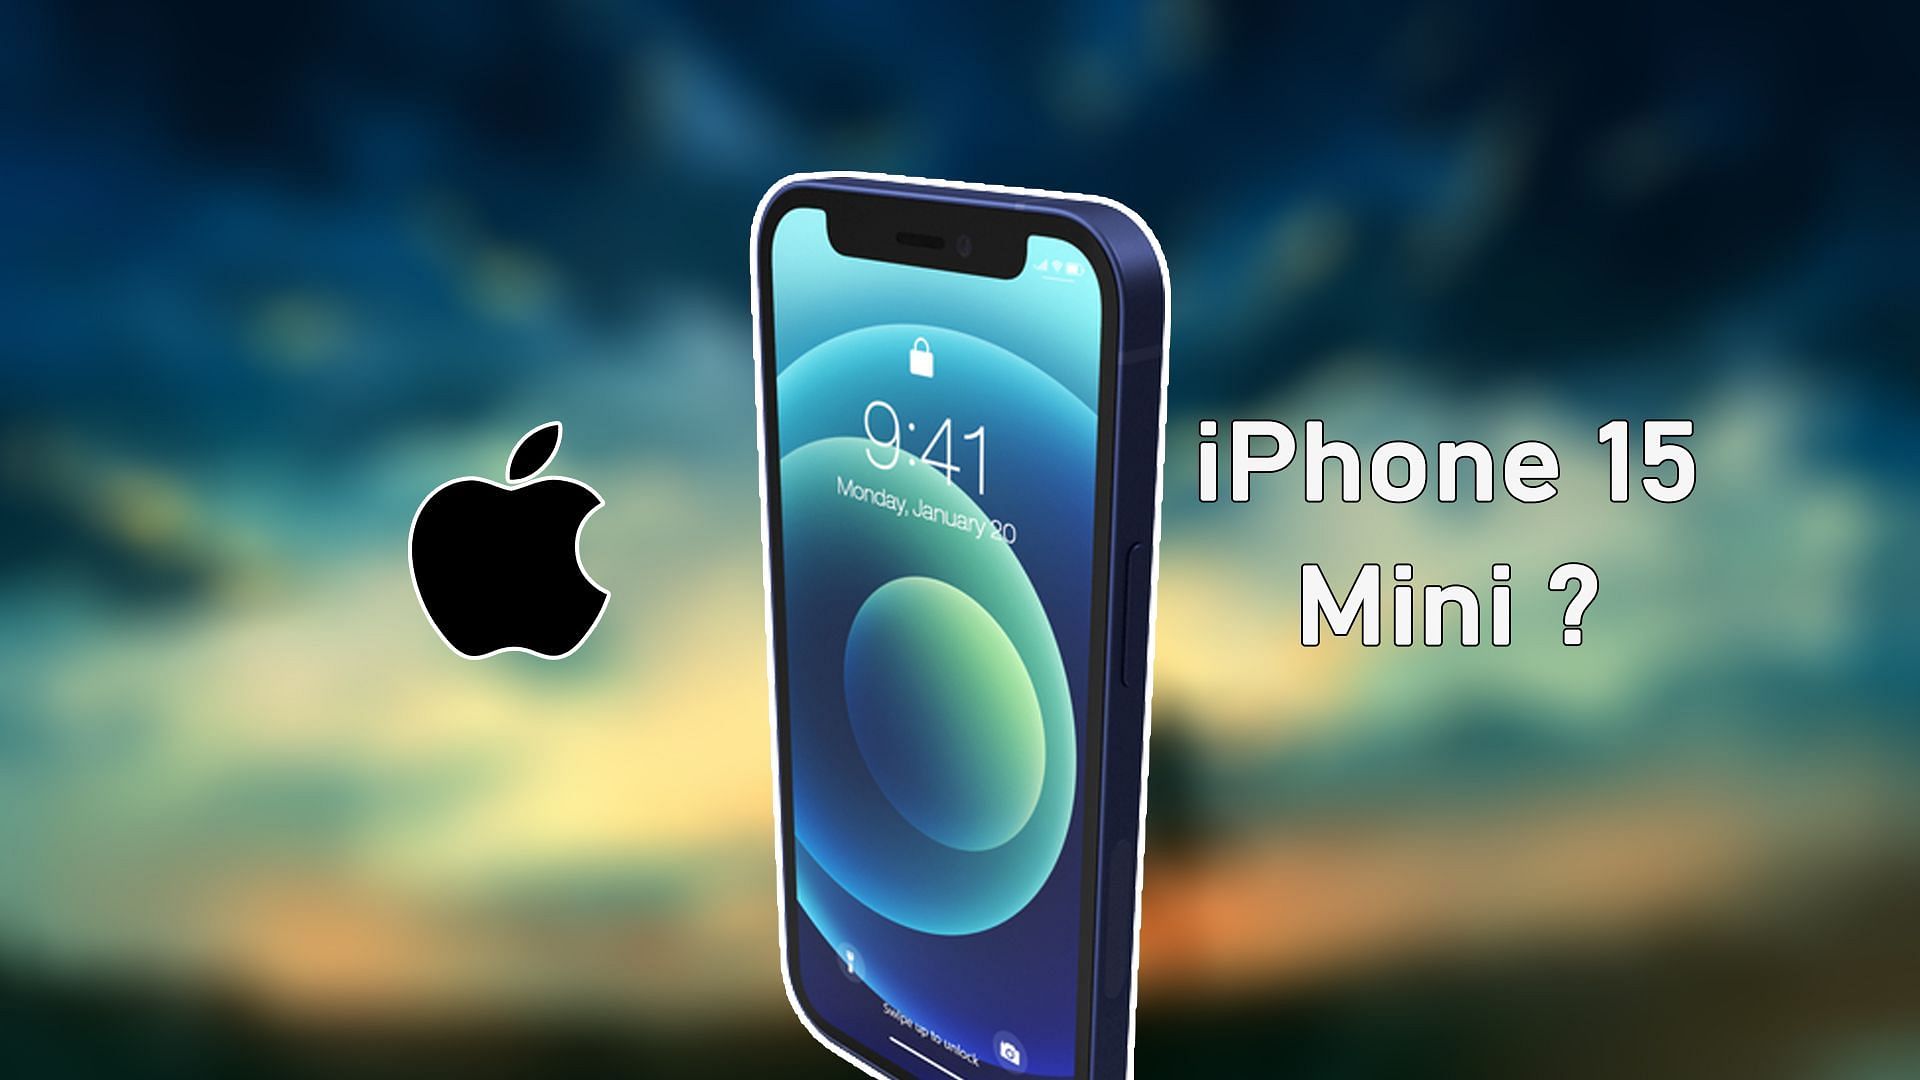 We can speculate that there will not be an iPhone 15 Mini.